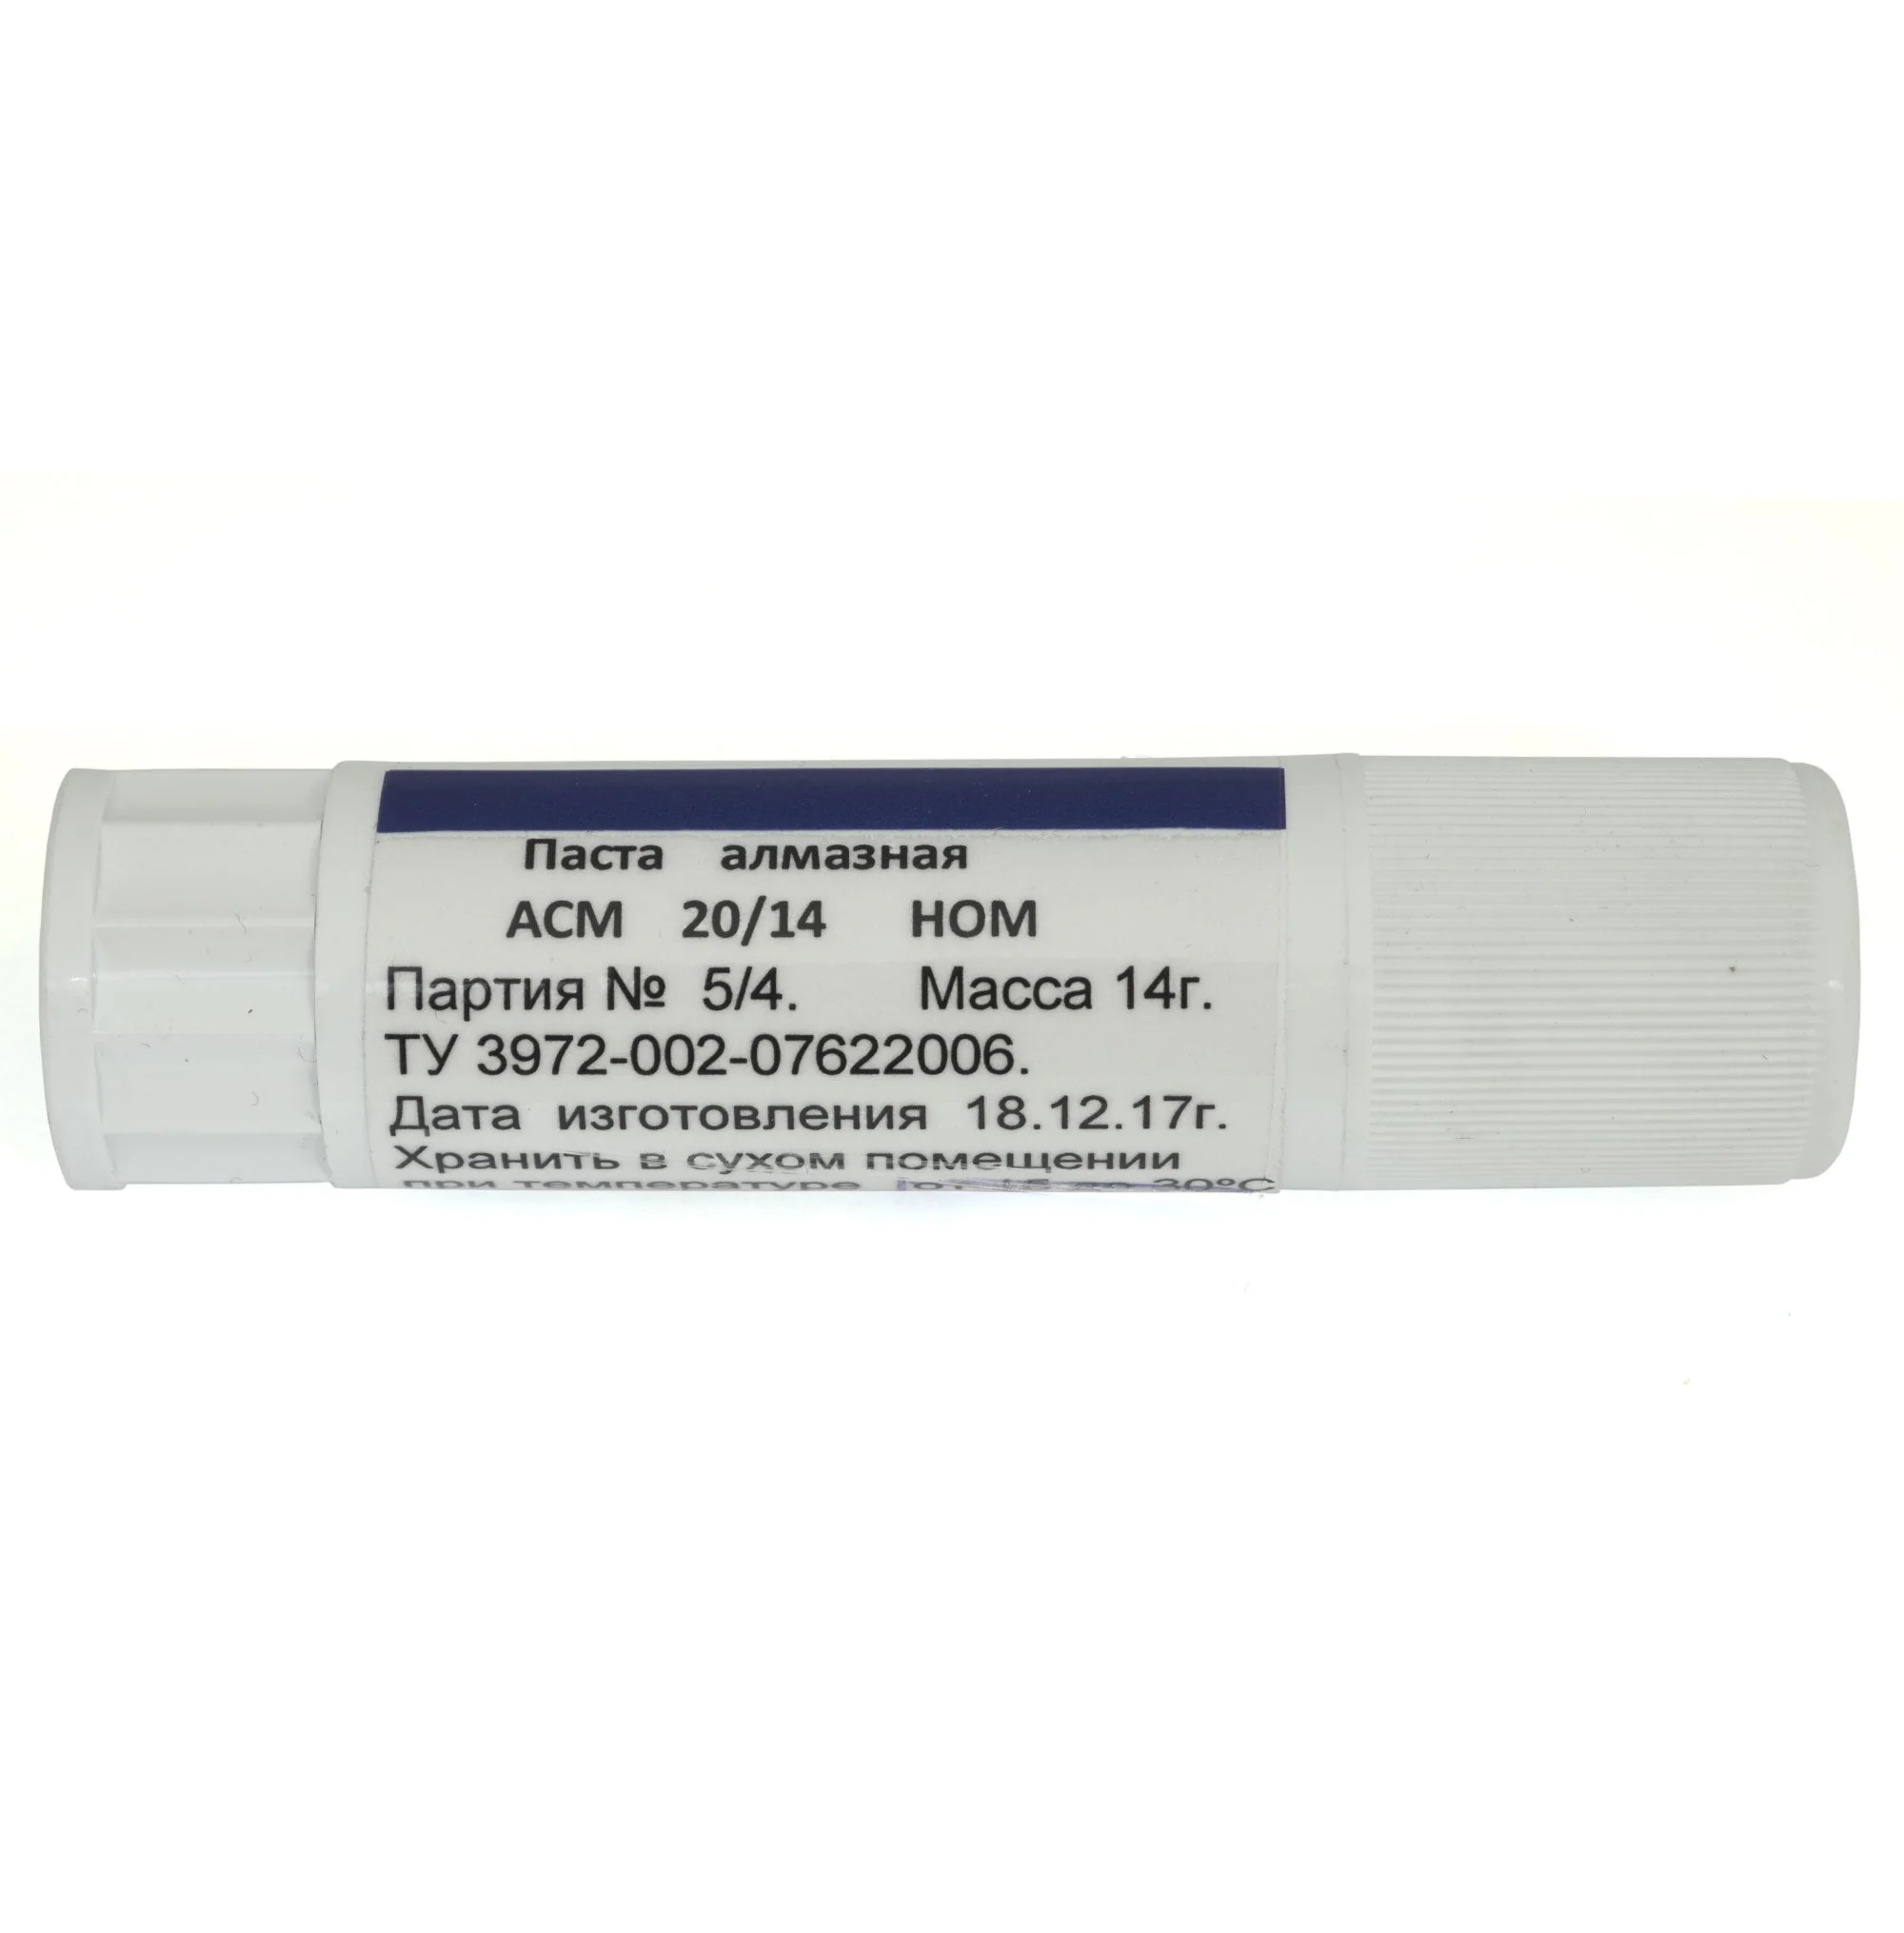 Venev Diamond Stropping Paste in Lip Balm Tube Questions & Answers